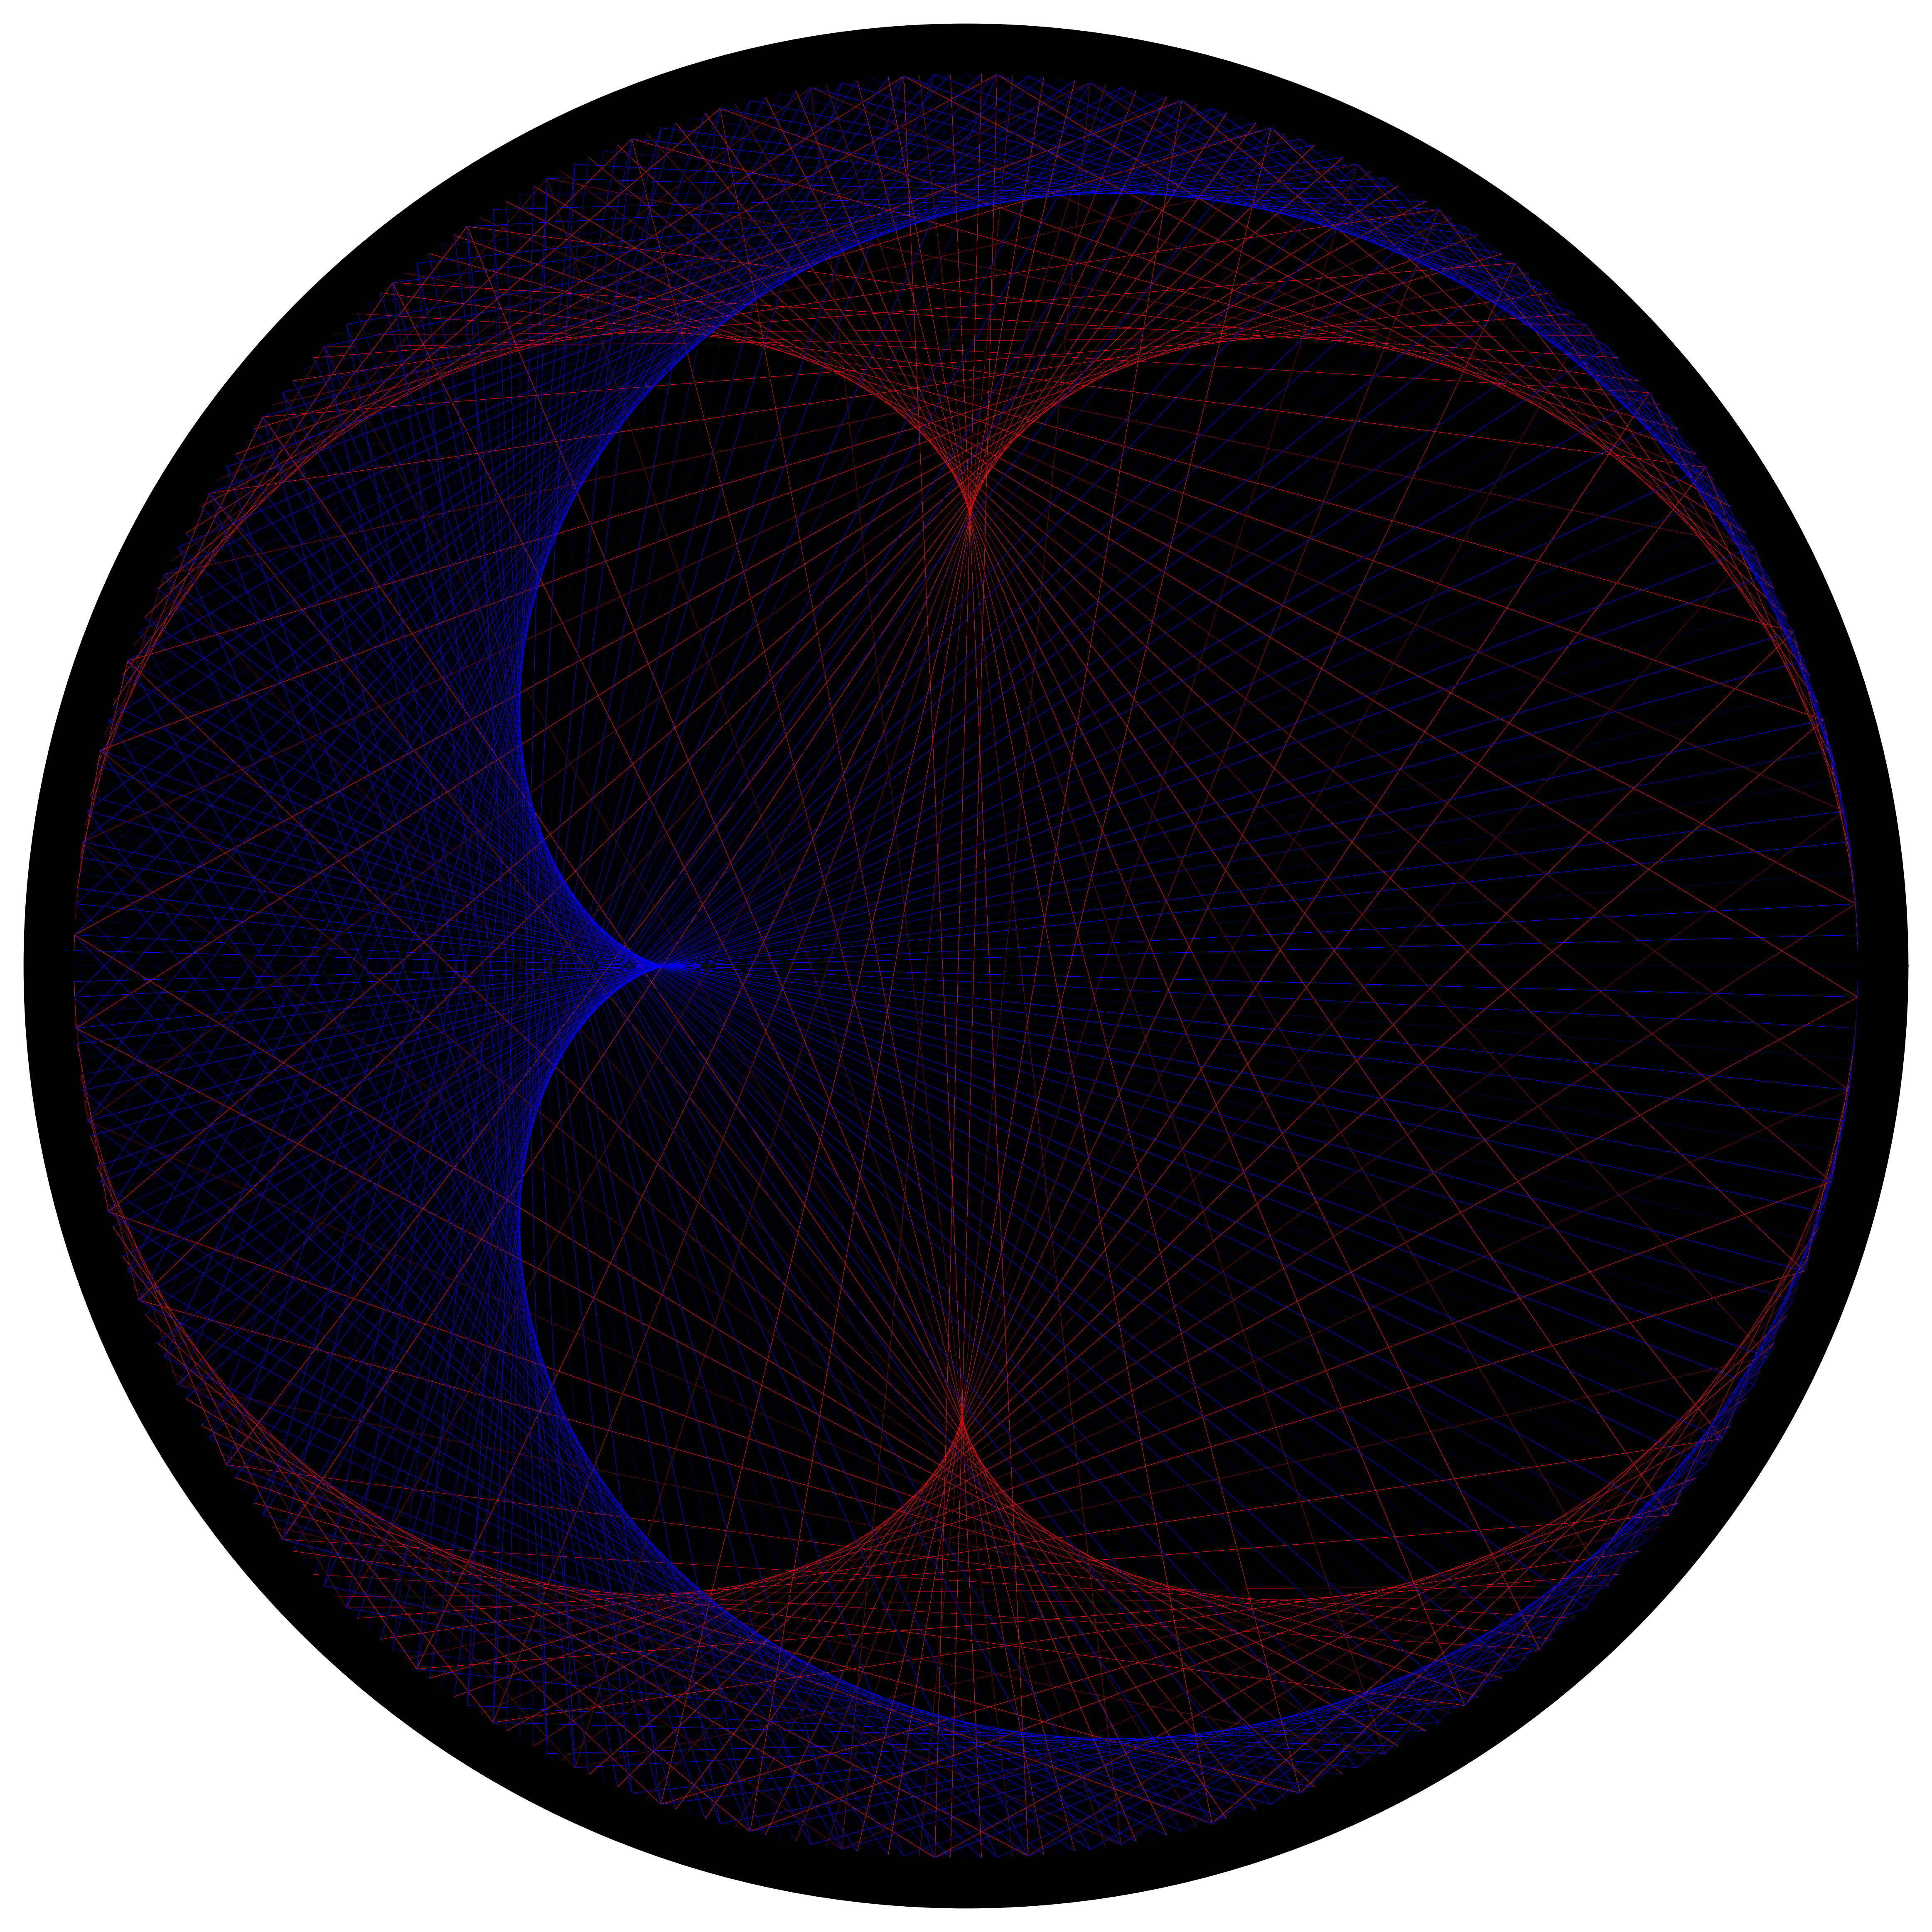 Plotted Collatz sequences colored